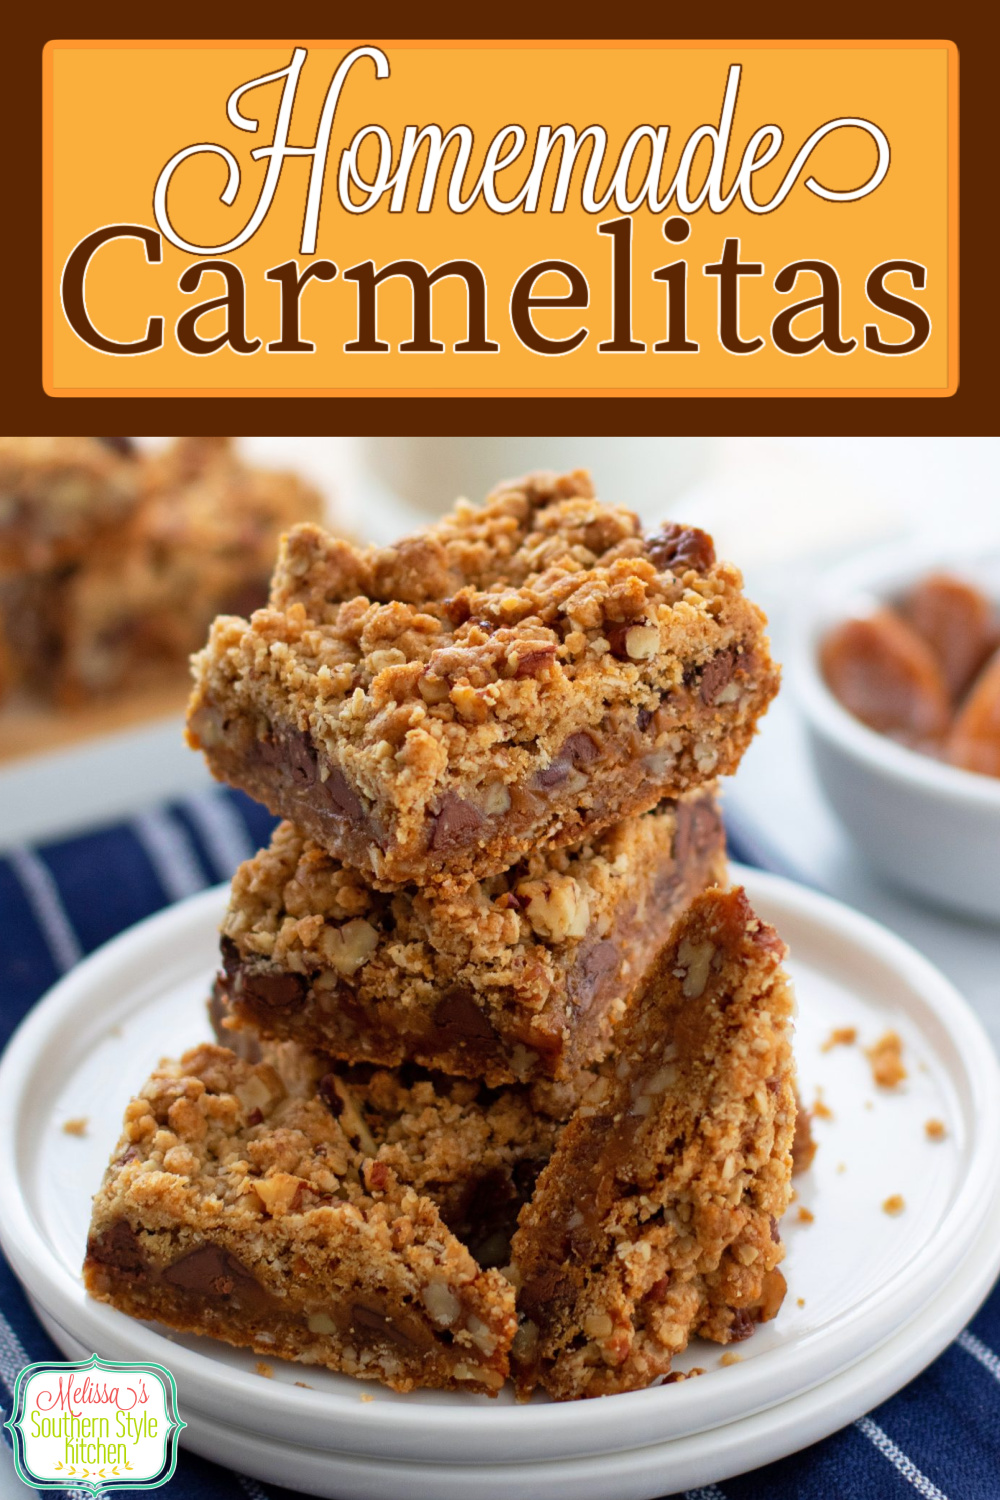 Carmelitas are a handheld dessert that's ideal for the holidays, game day or packed up for picnics and backyard barbecues #carmelitas #cookiebars #cookierecipes #traderjoescaramels #carameldesserts #bestcarmelitas via @melissasssk